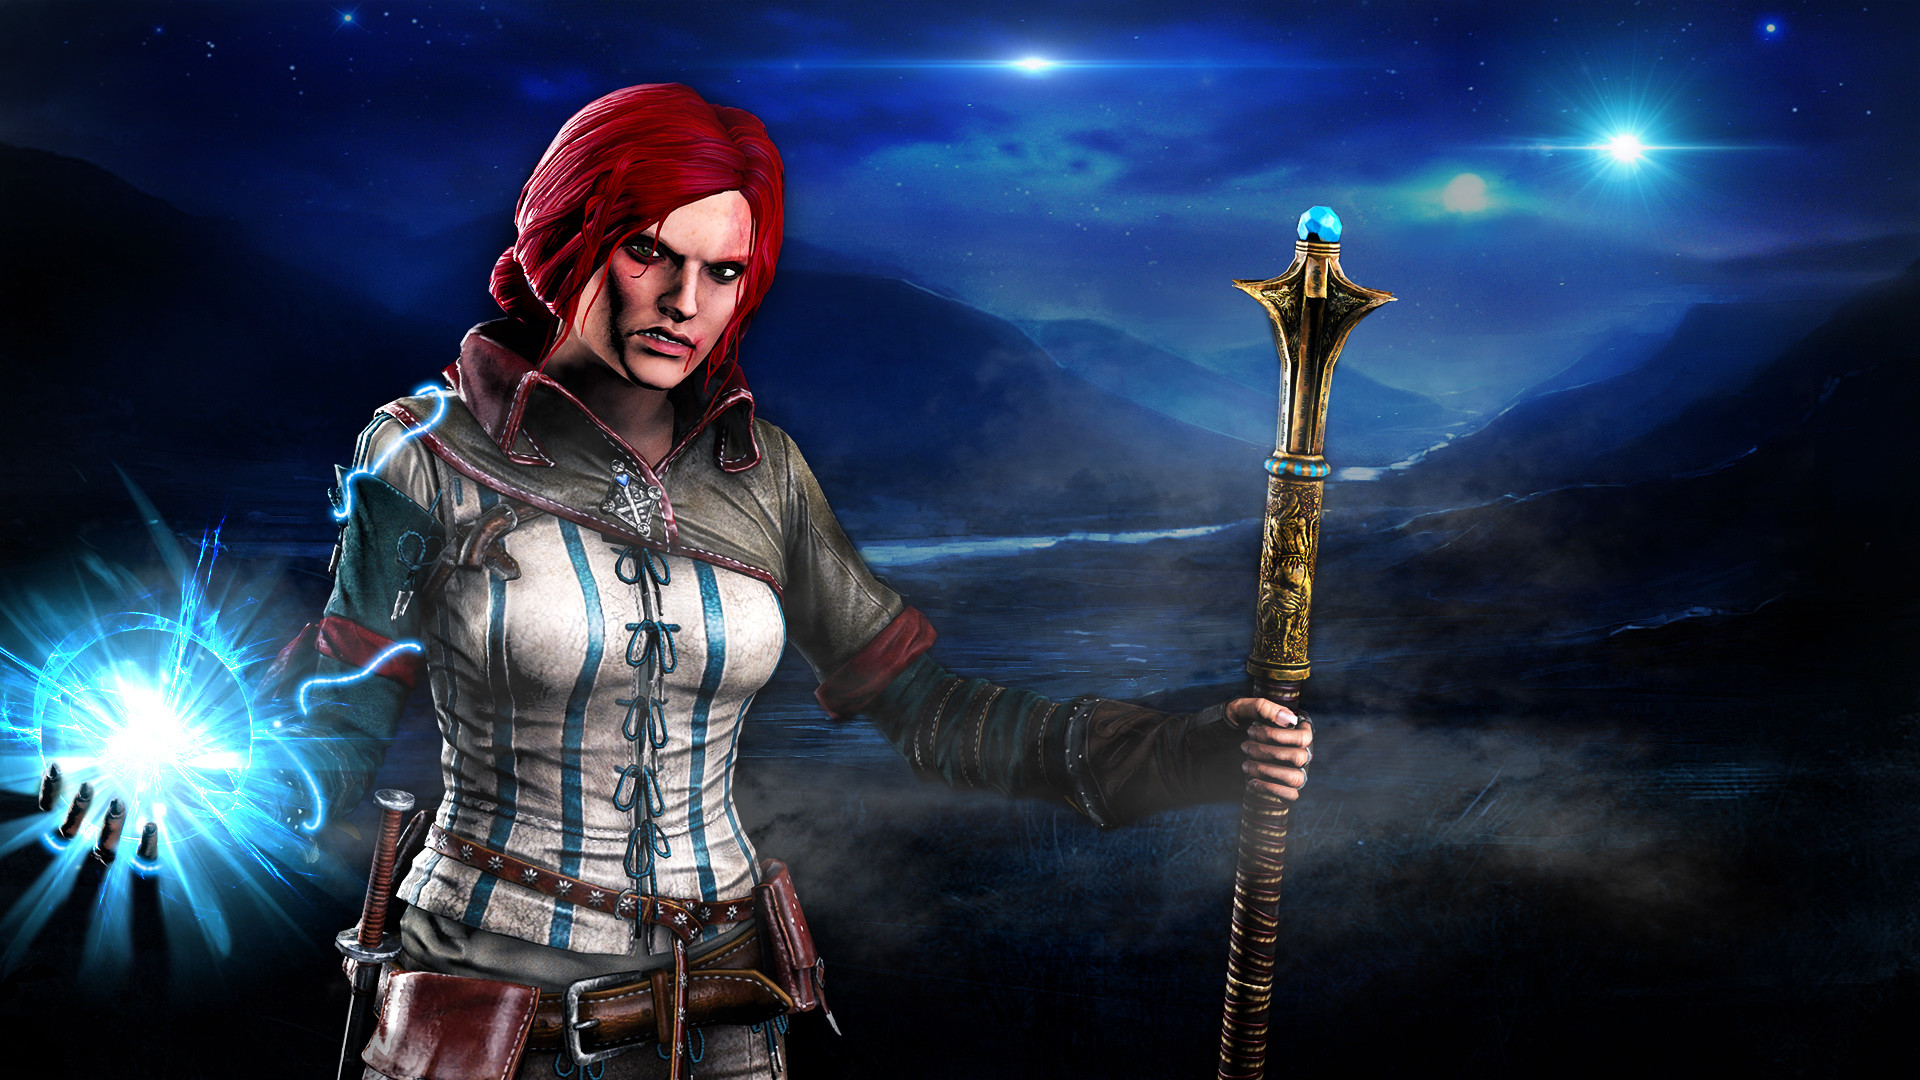 Wallpaper  video games Triss Merigold The Witcher 3440x1440  starbeat   1384919  HD Wallpapers  WallHere